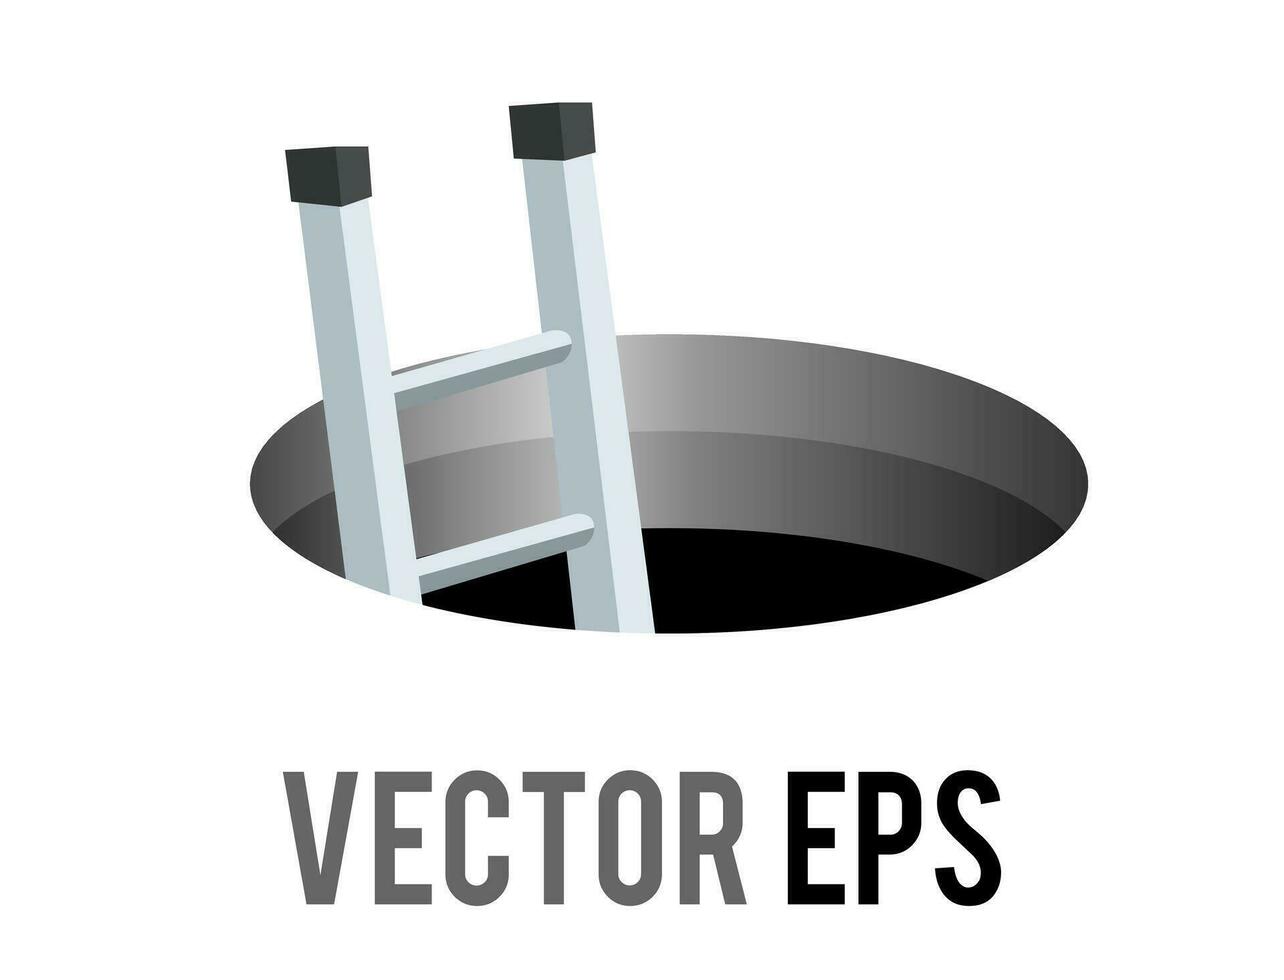 Vector round black cartoon styled hole, manhole icon with silver metal stairs